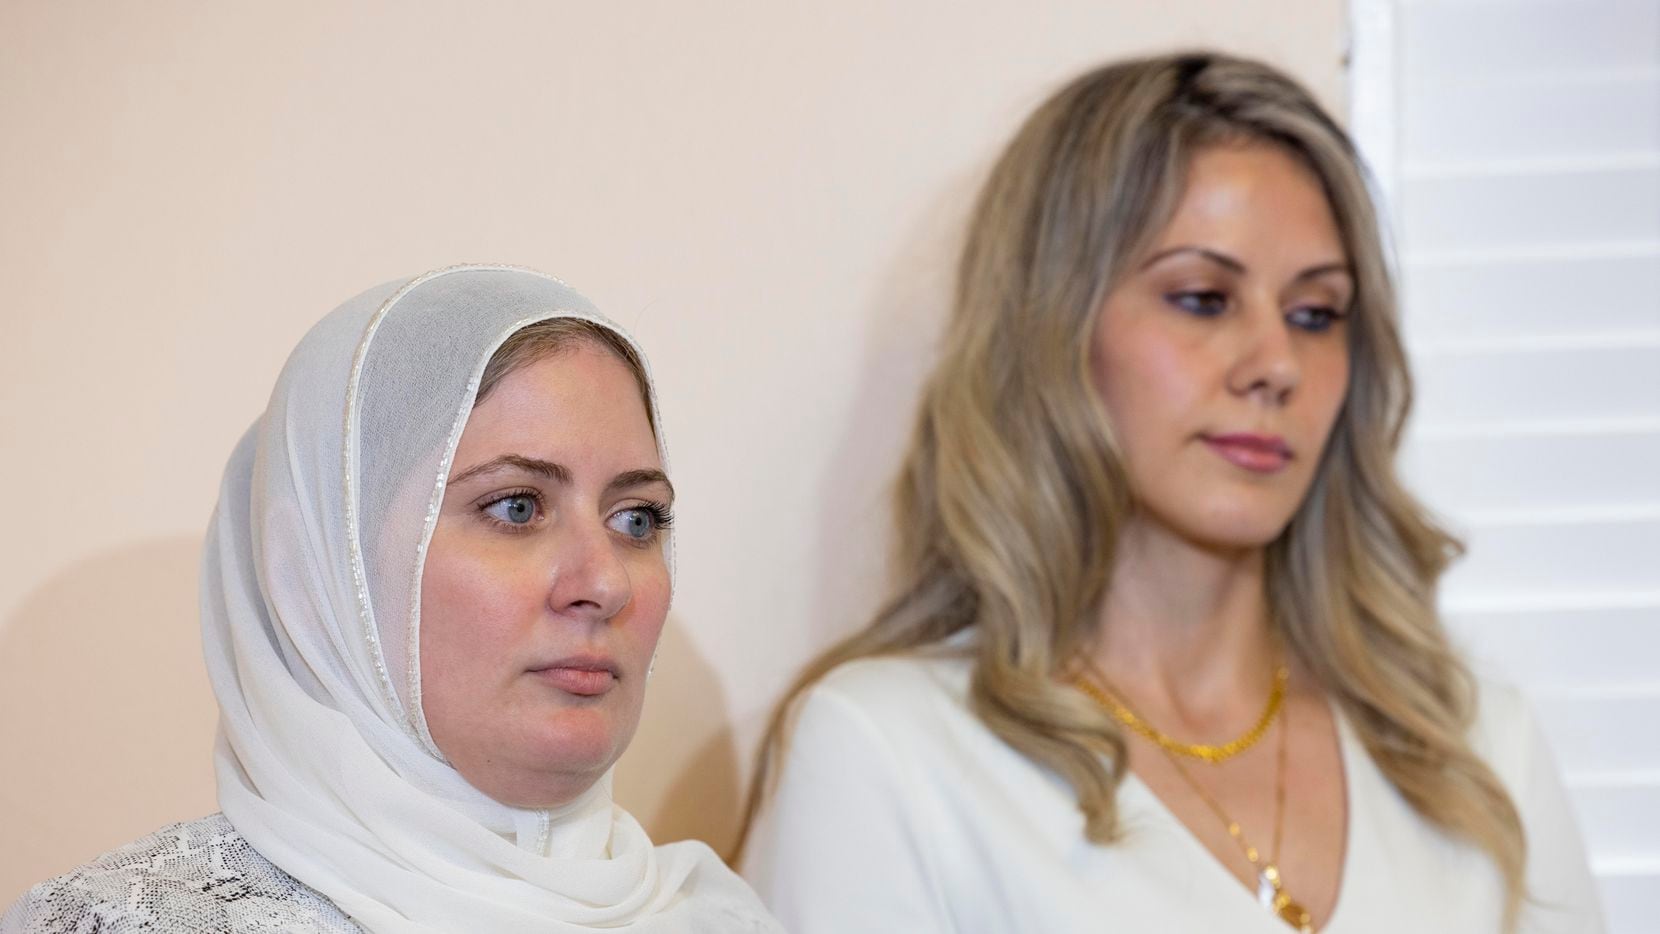 Fatima Altakrouri (left) and sister Muna Kowni listen to their attorney Marwa Elbially at a press conference by the Dallas-Fort-Worth chapter of the Council on American-Islamic Relations outlining a complaint they filed against Southwest Airlines for alleged religious discrimination on Tuesday, June 1, 2021, in Plano. (Juan Figueroa/The Dallas Morning News)